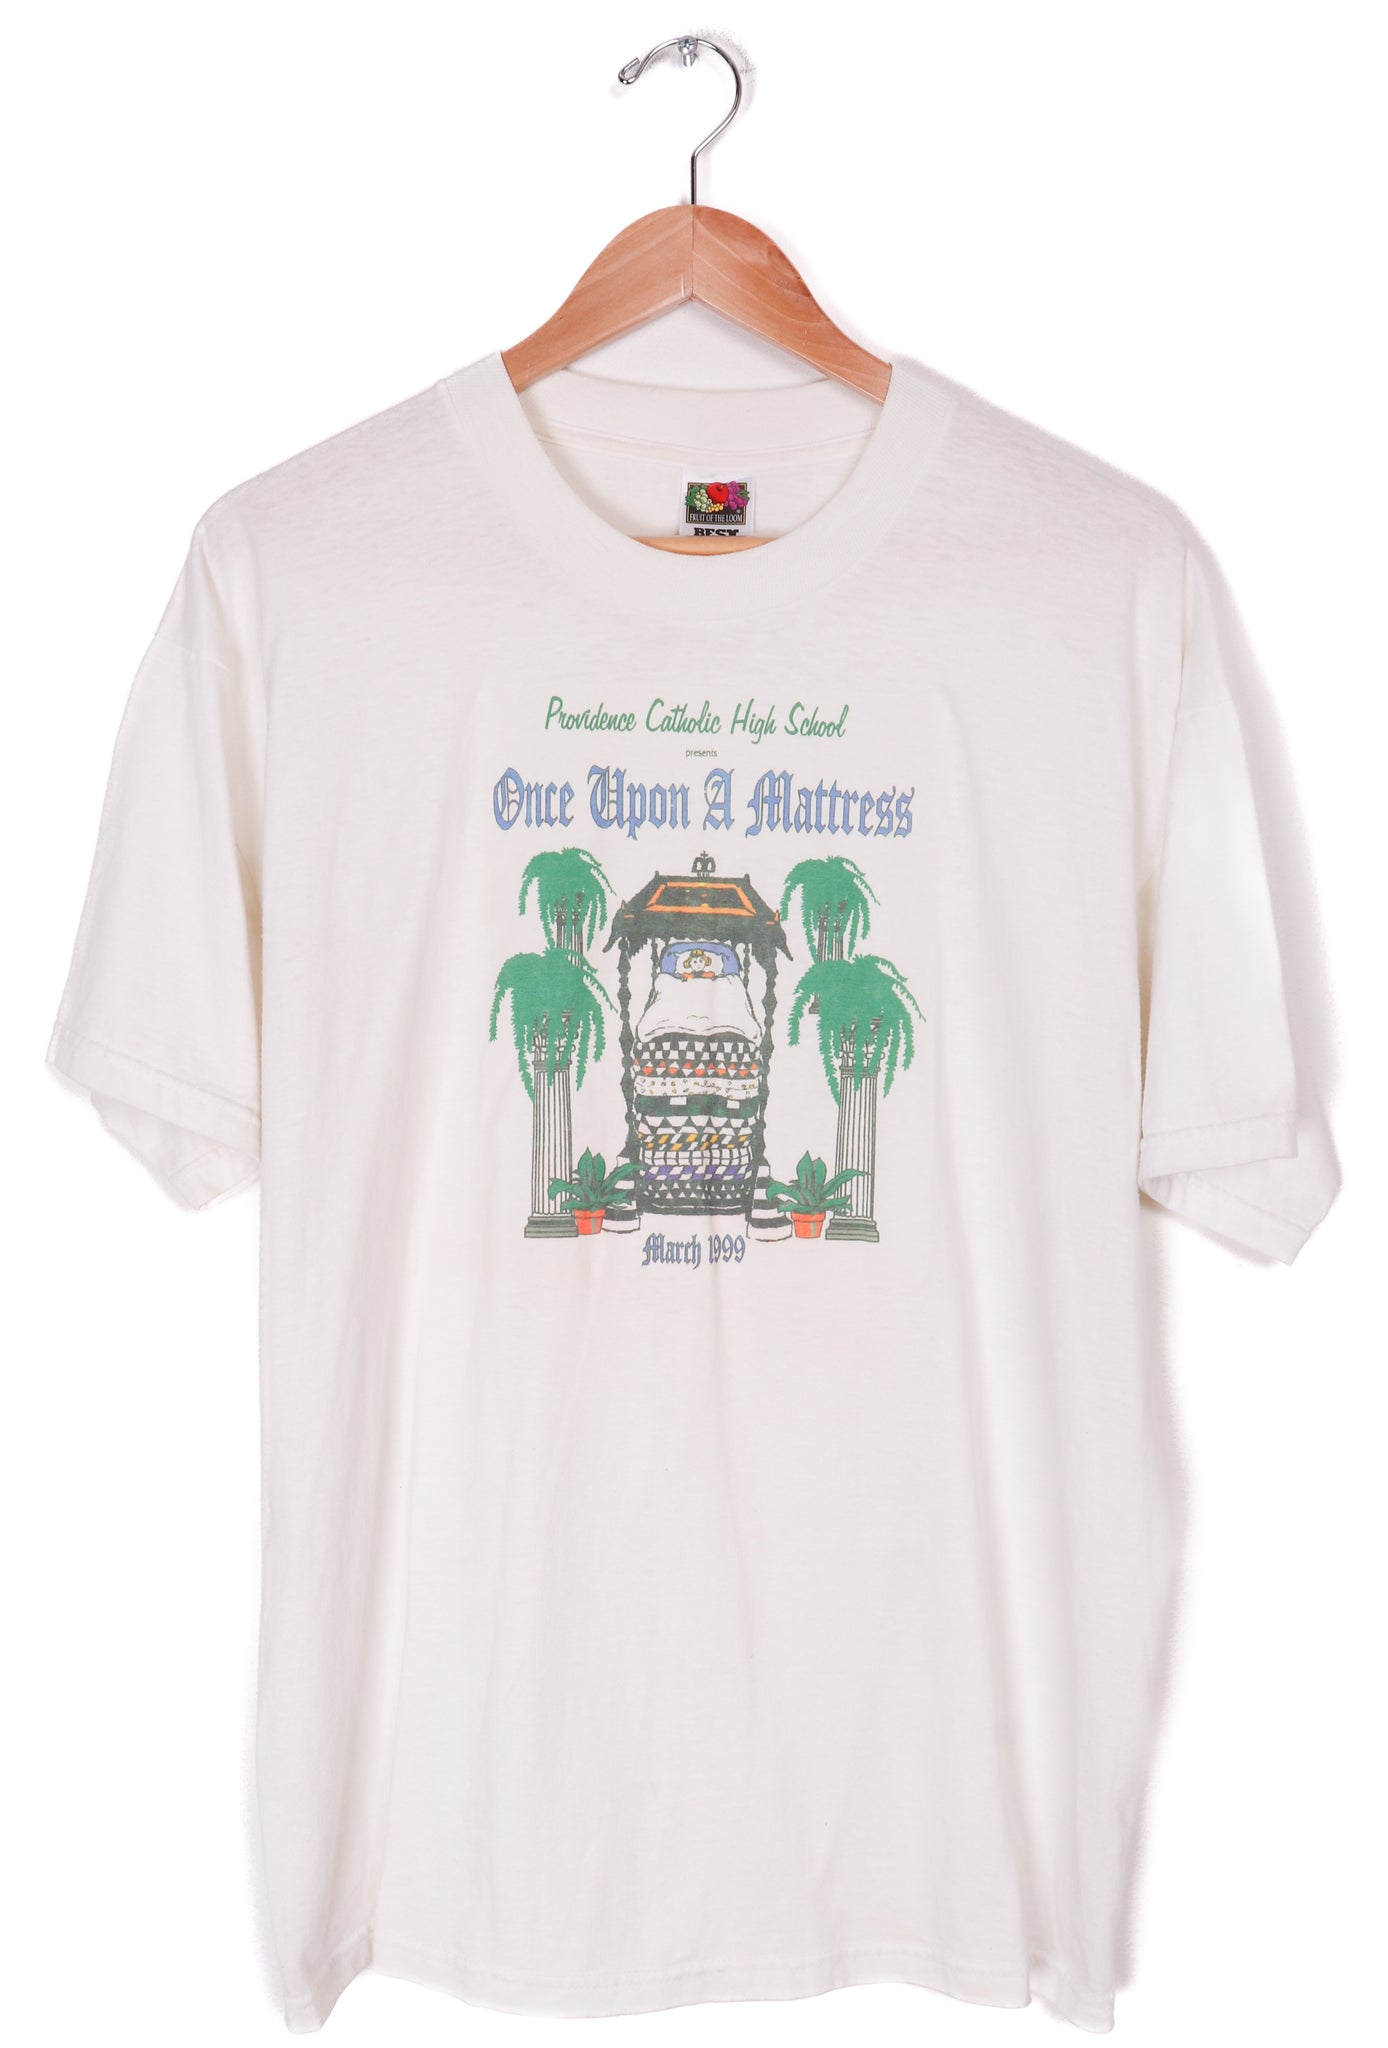 1999 Providence High School Presents "Once Upon a Mattress" Show T-Shirt